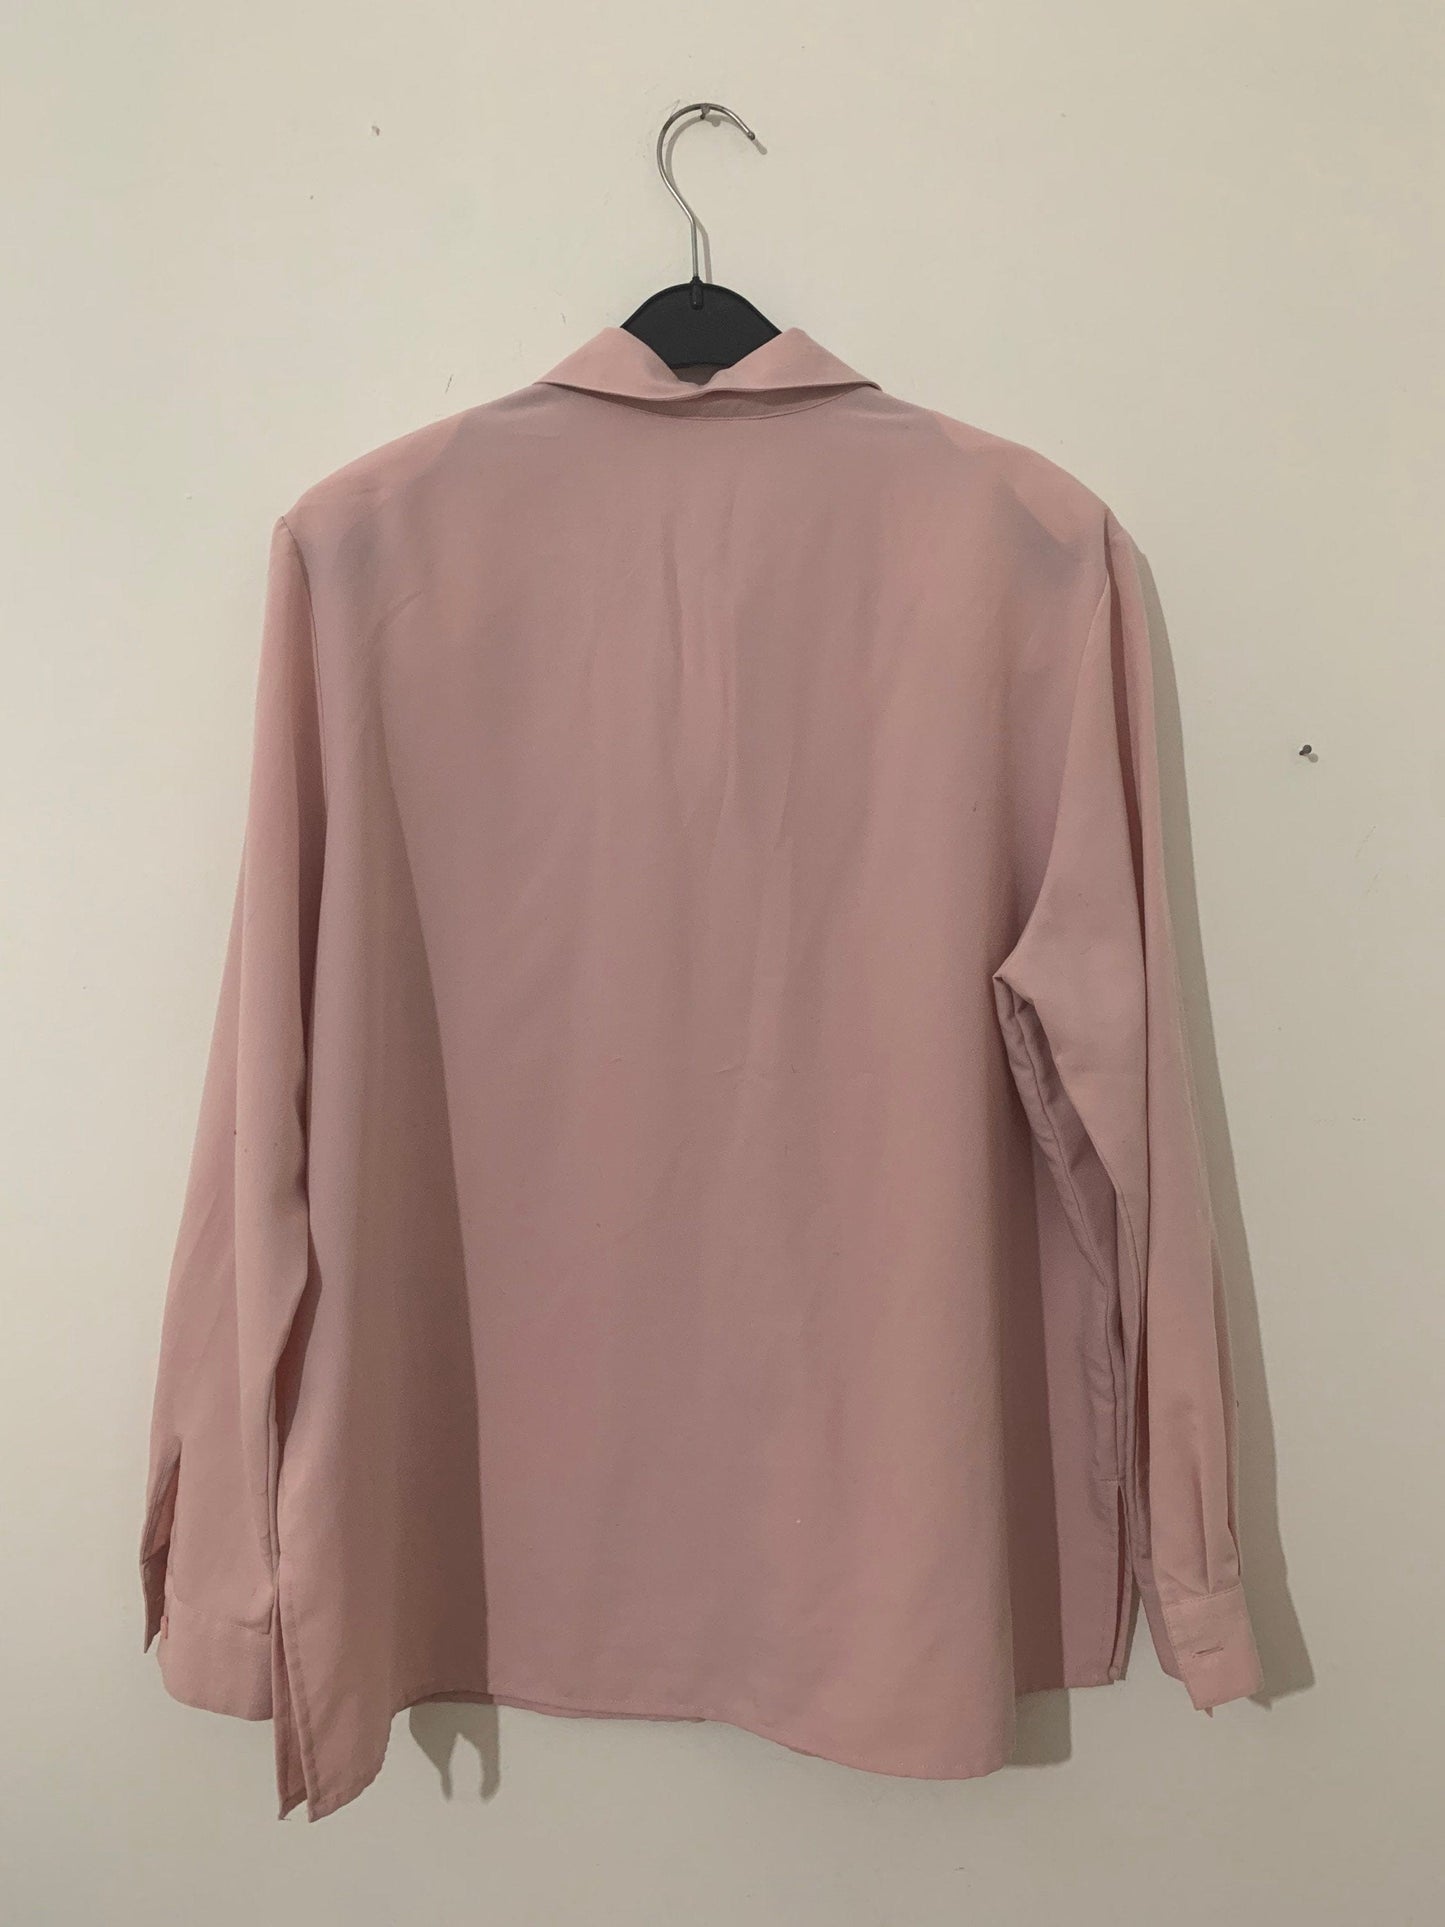 Pink Vintage Blouse Semi Sheer Button Through Boxy long Sleeves - Size 14